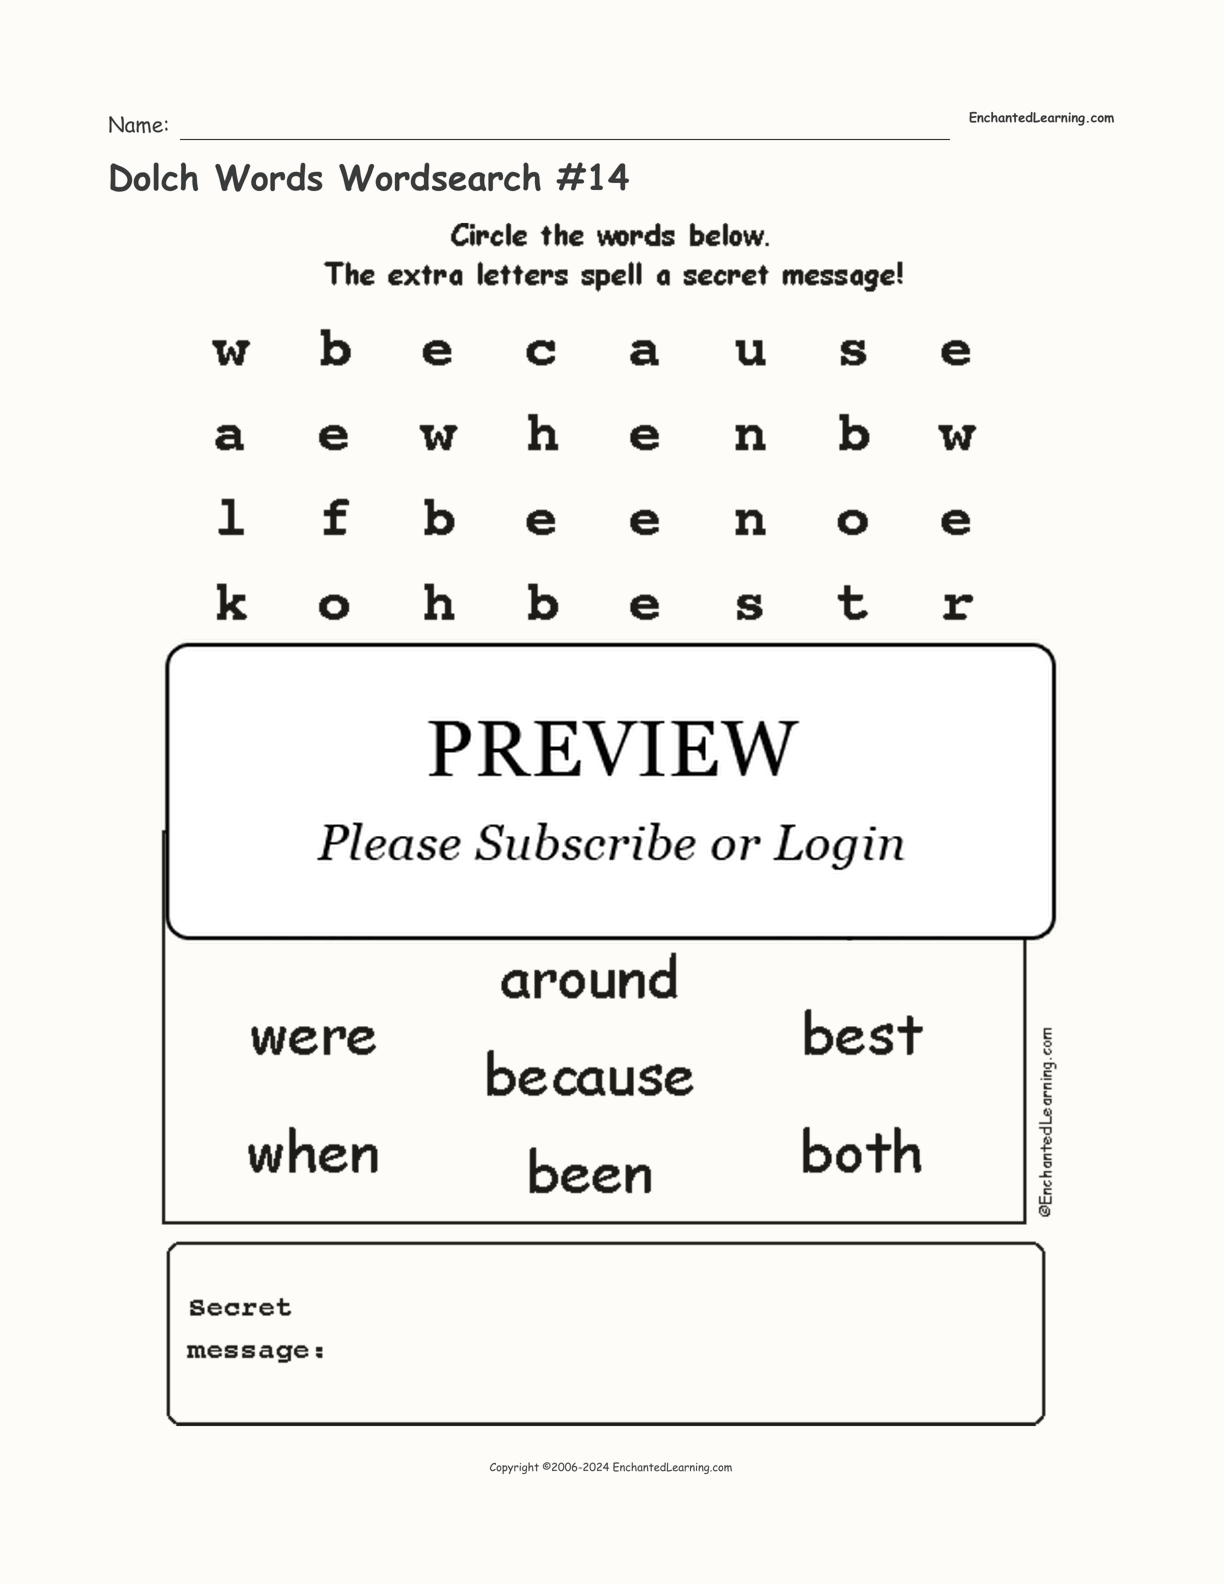 Dolch Words Wordsearch #14 interactive worksheet page 1